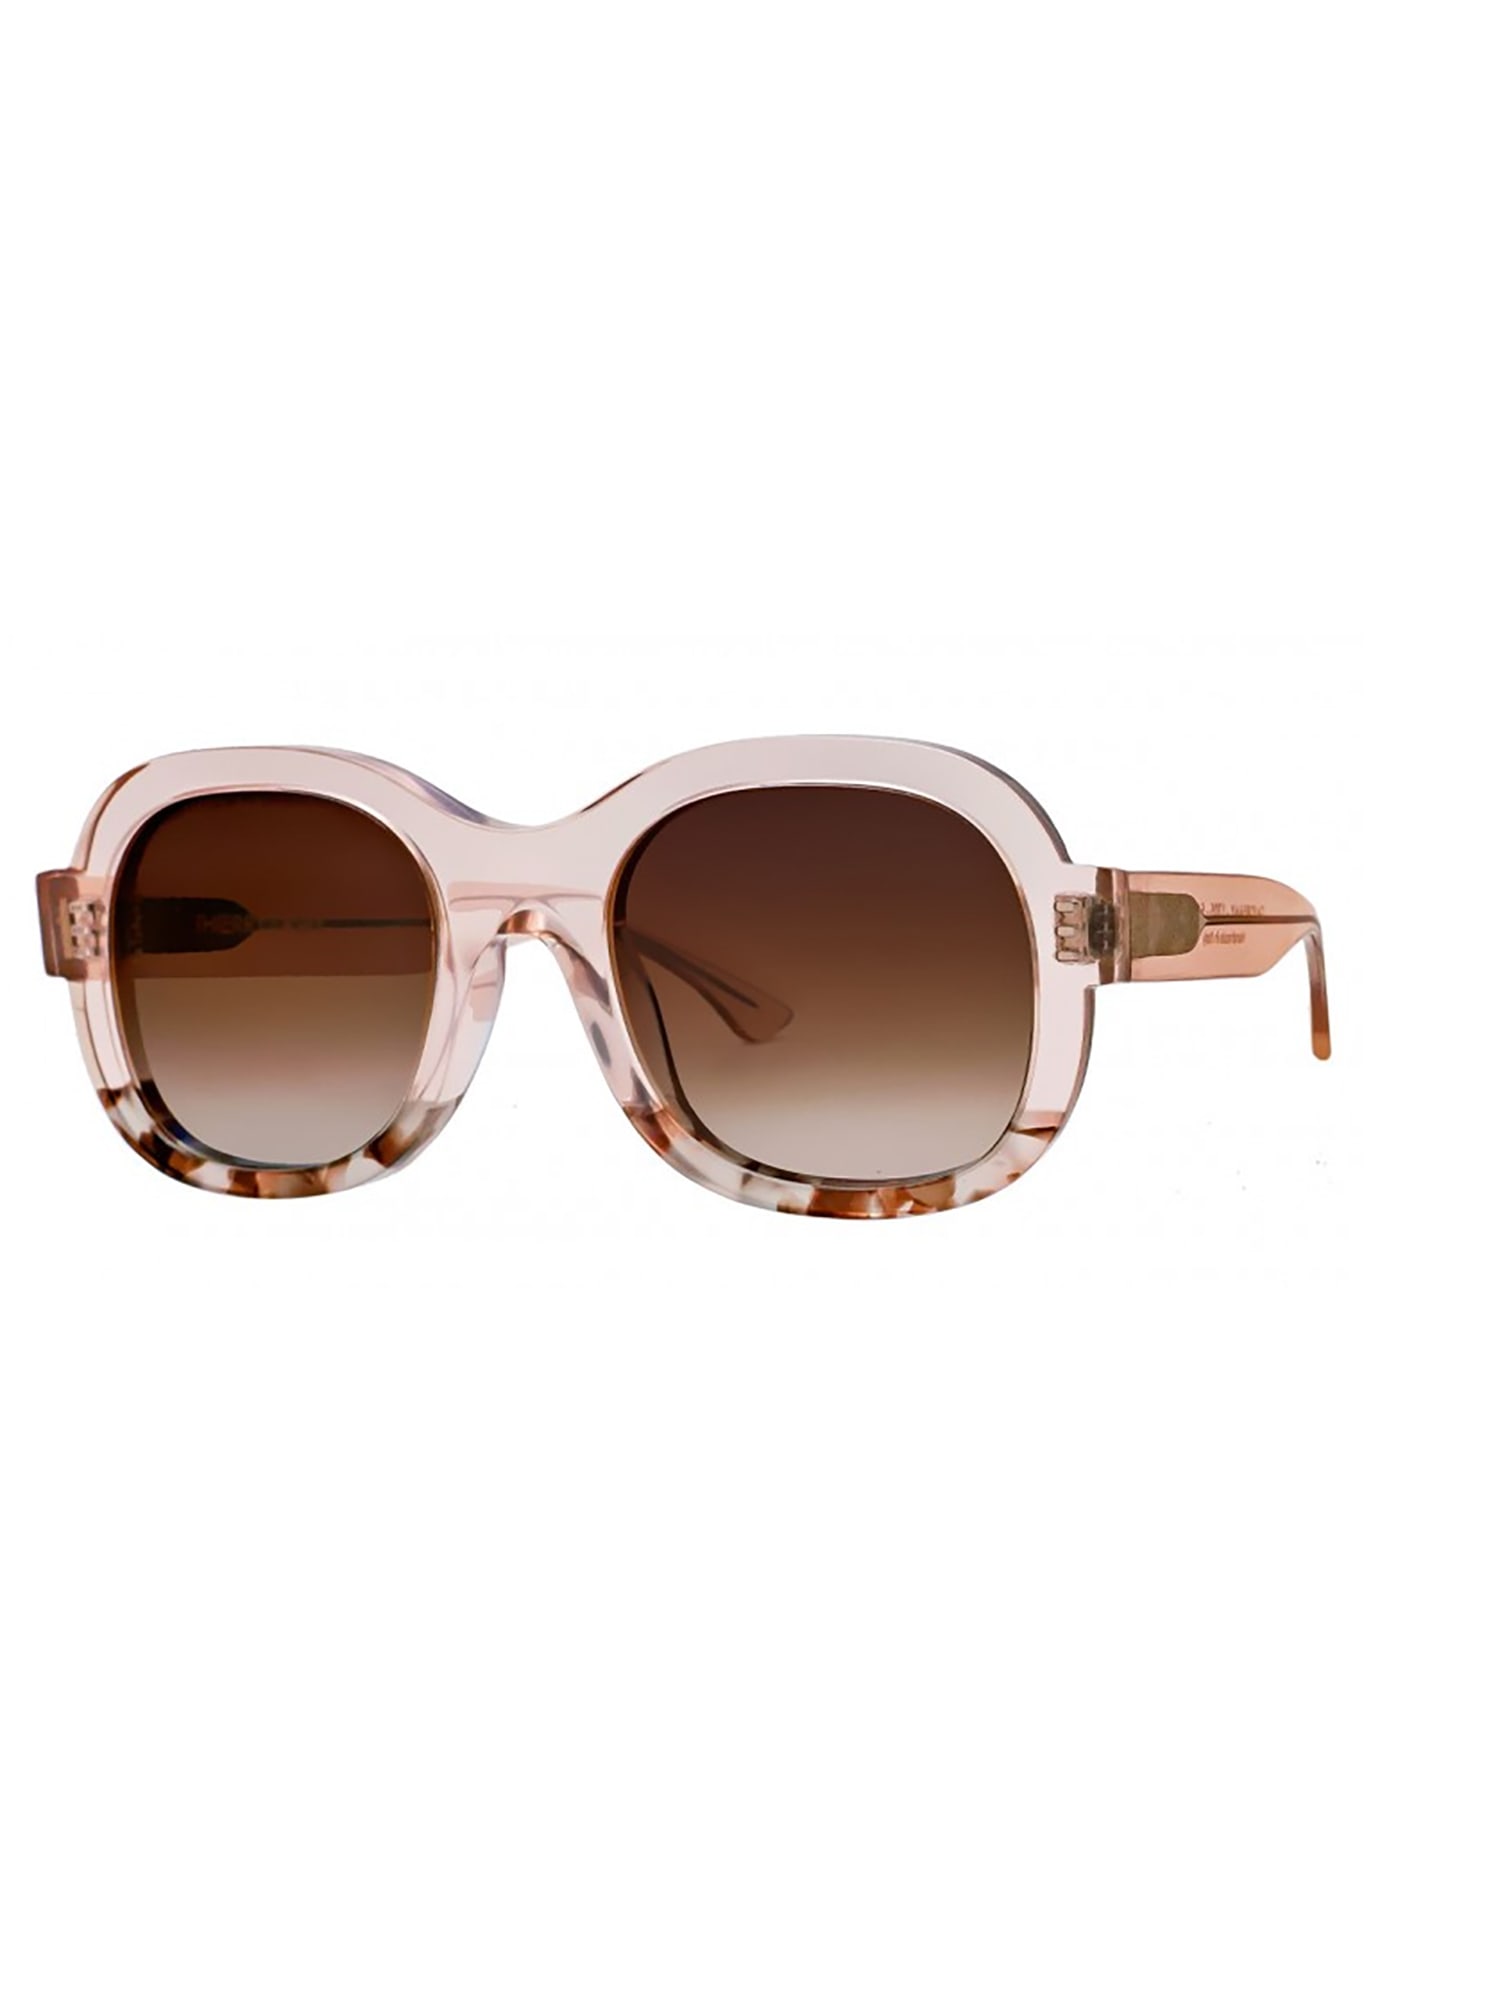 Shop Thierry Lasry Daydreamy Sunglasses